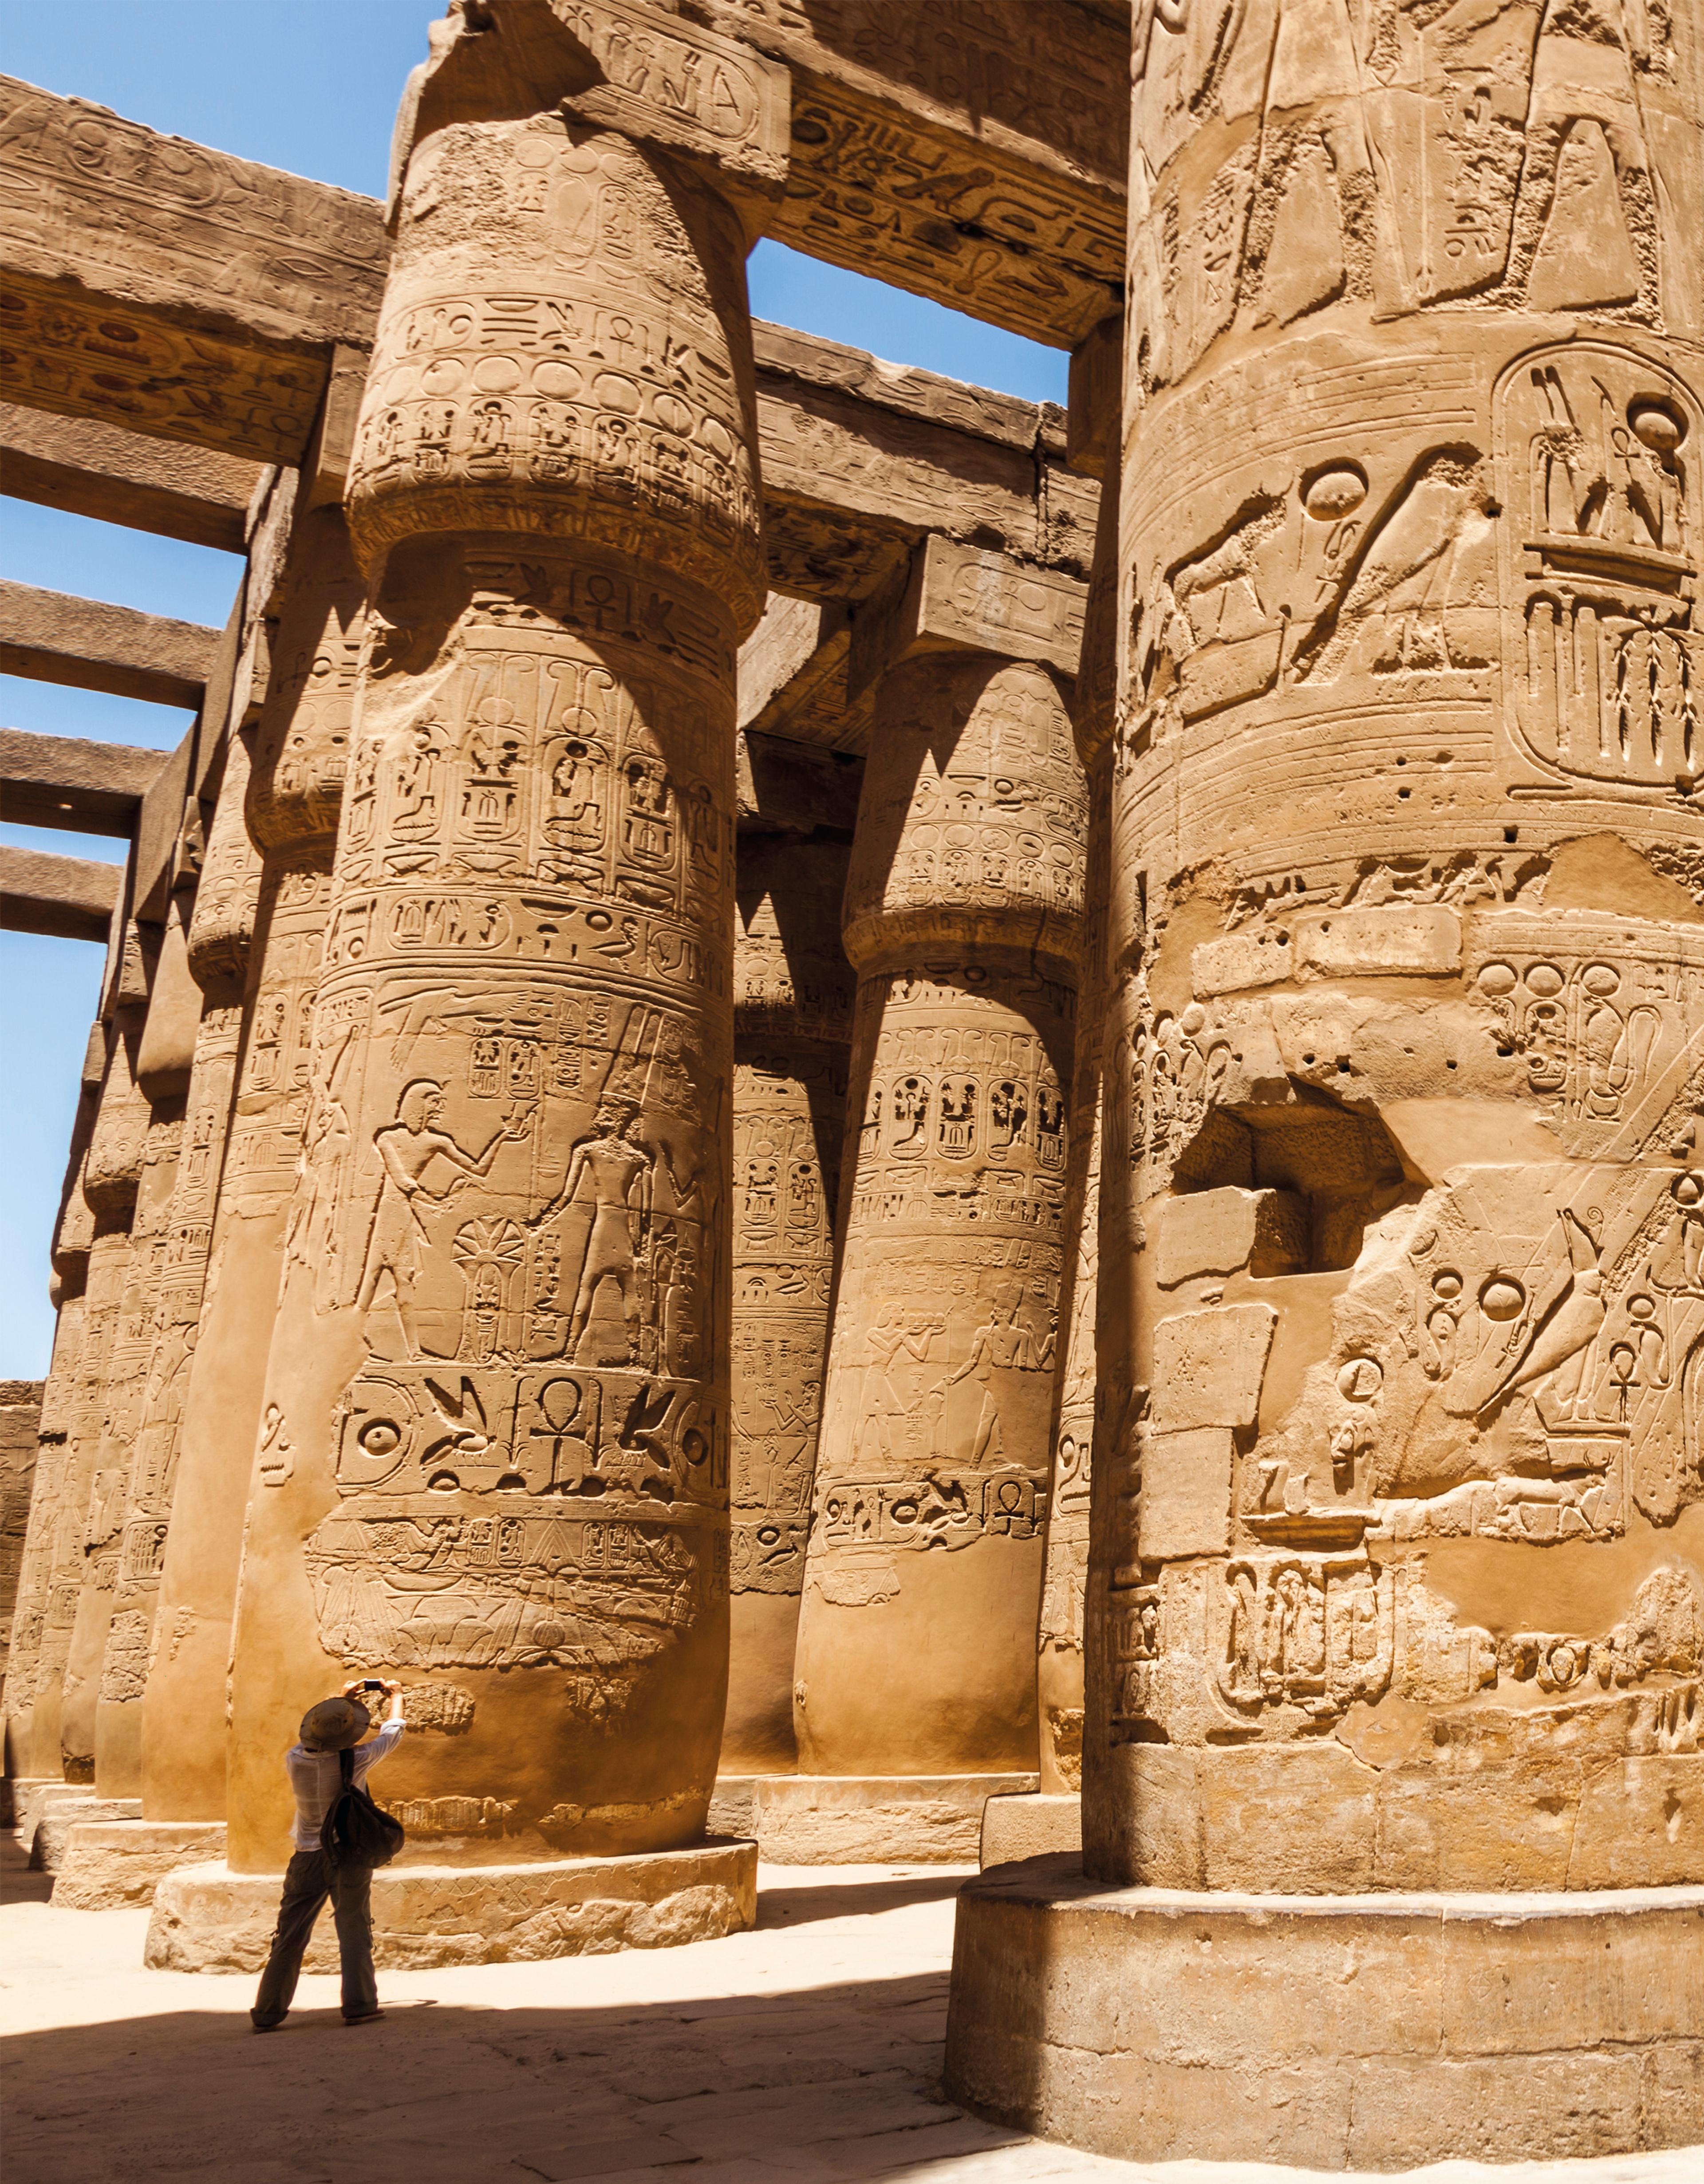 A person looks up to photograph the Karnak columns in Egypt.